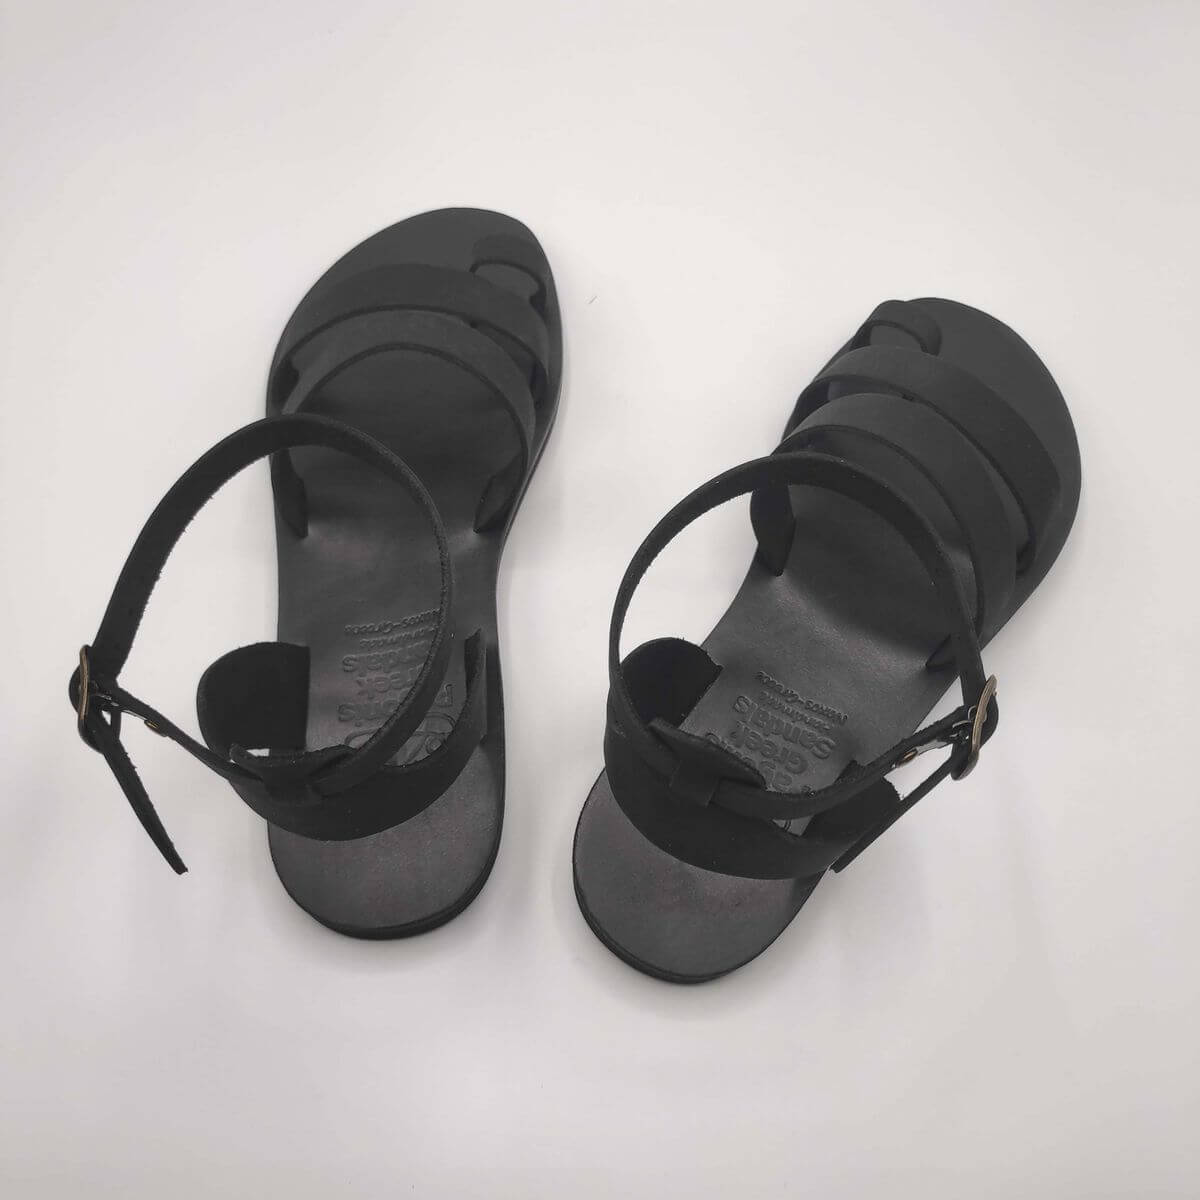 Black Nubuck leather dressy sandals with two straps, toe ring and high ankle strap, back view